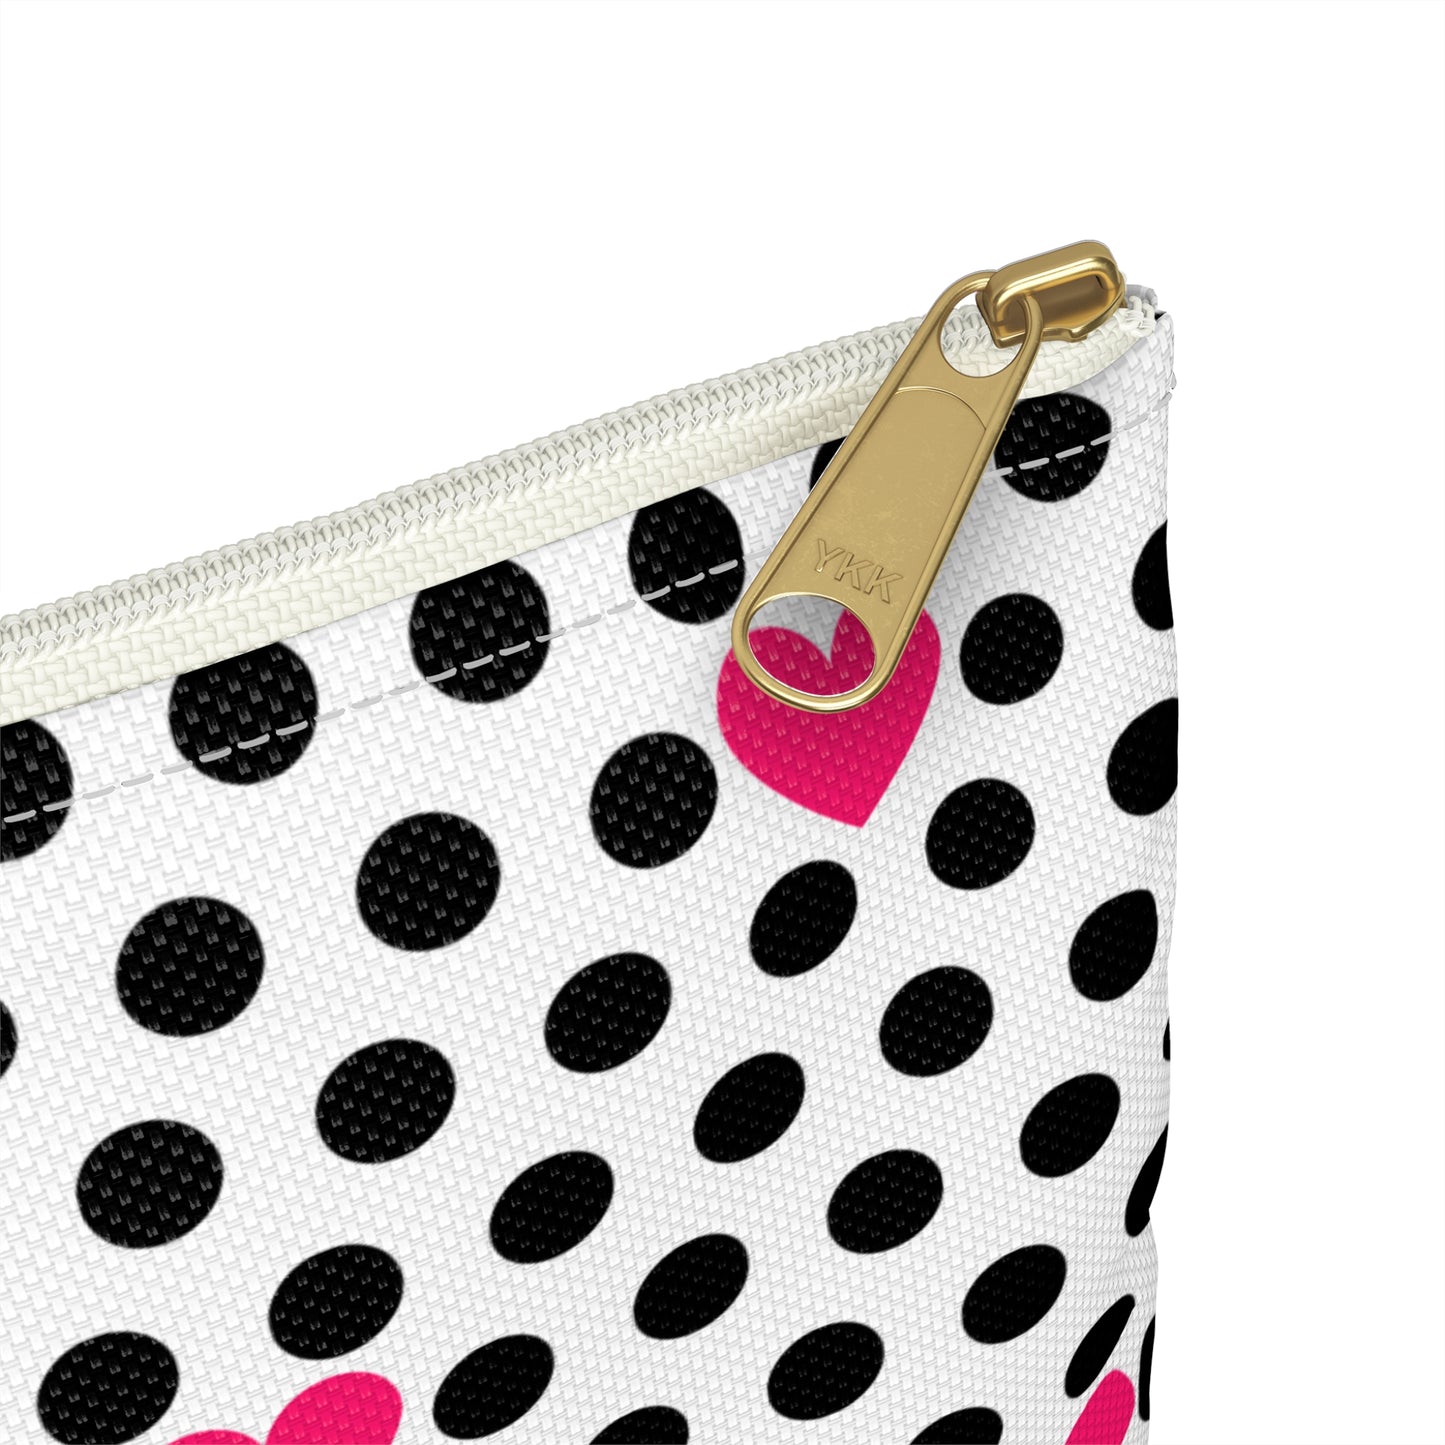 a black and white polka dot purse with a pink heart on it